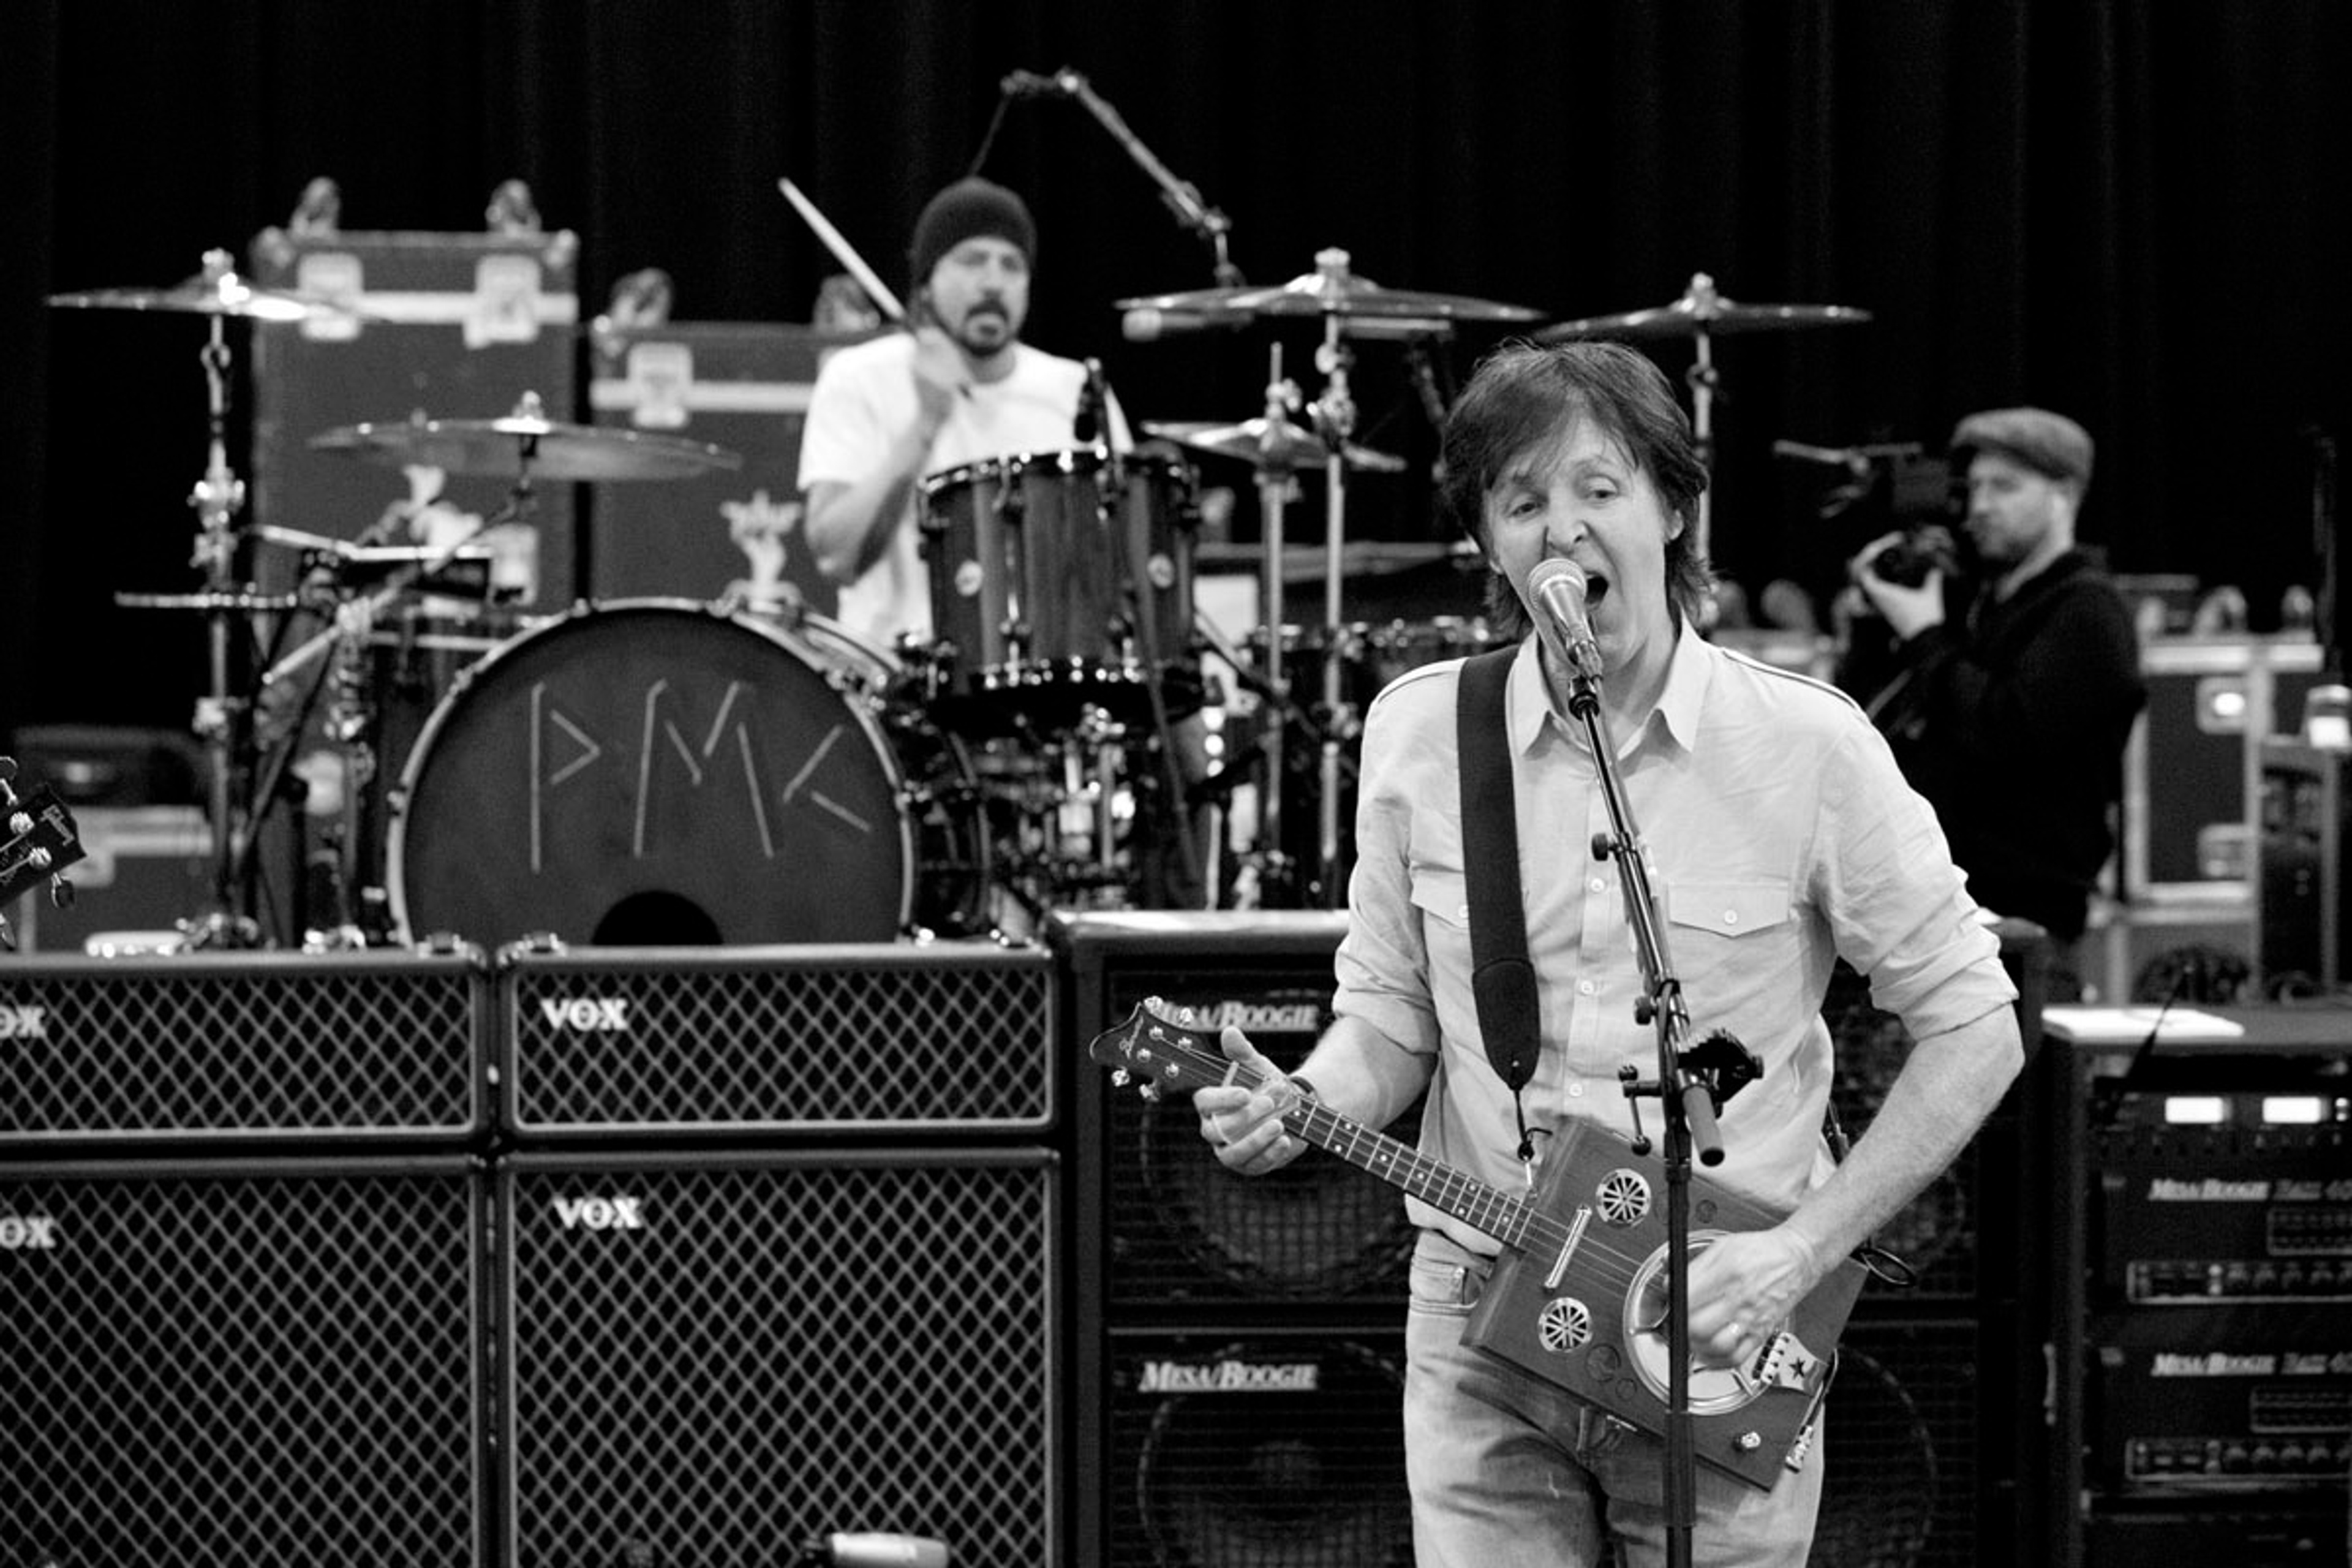 Dave Grohl and Paul rehearsing, 12-12-12 Hurricane Sandy Benefit, Madison Square Garden, NYC, 10th December 2012